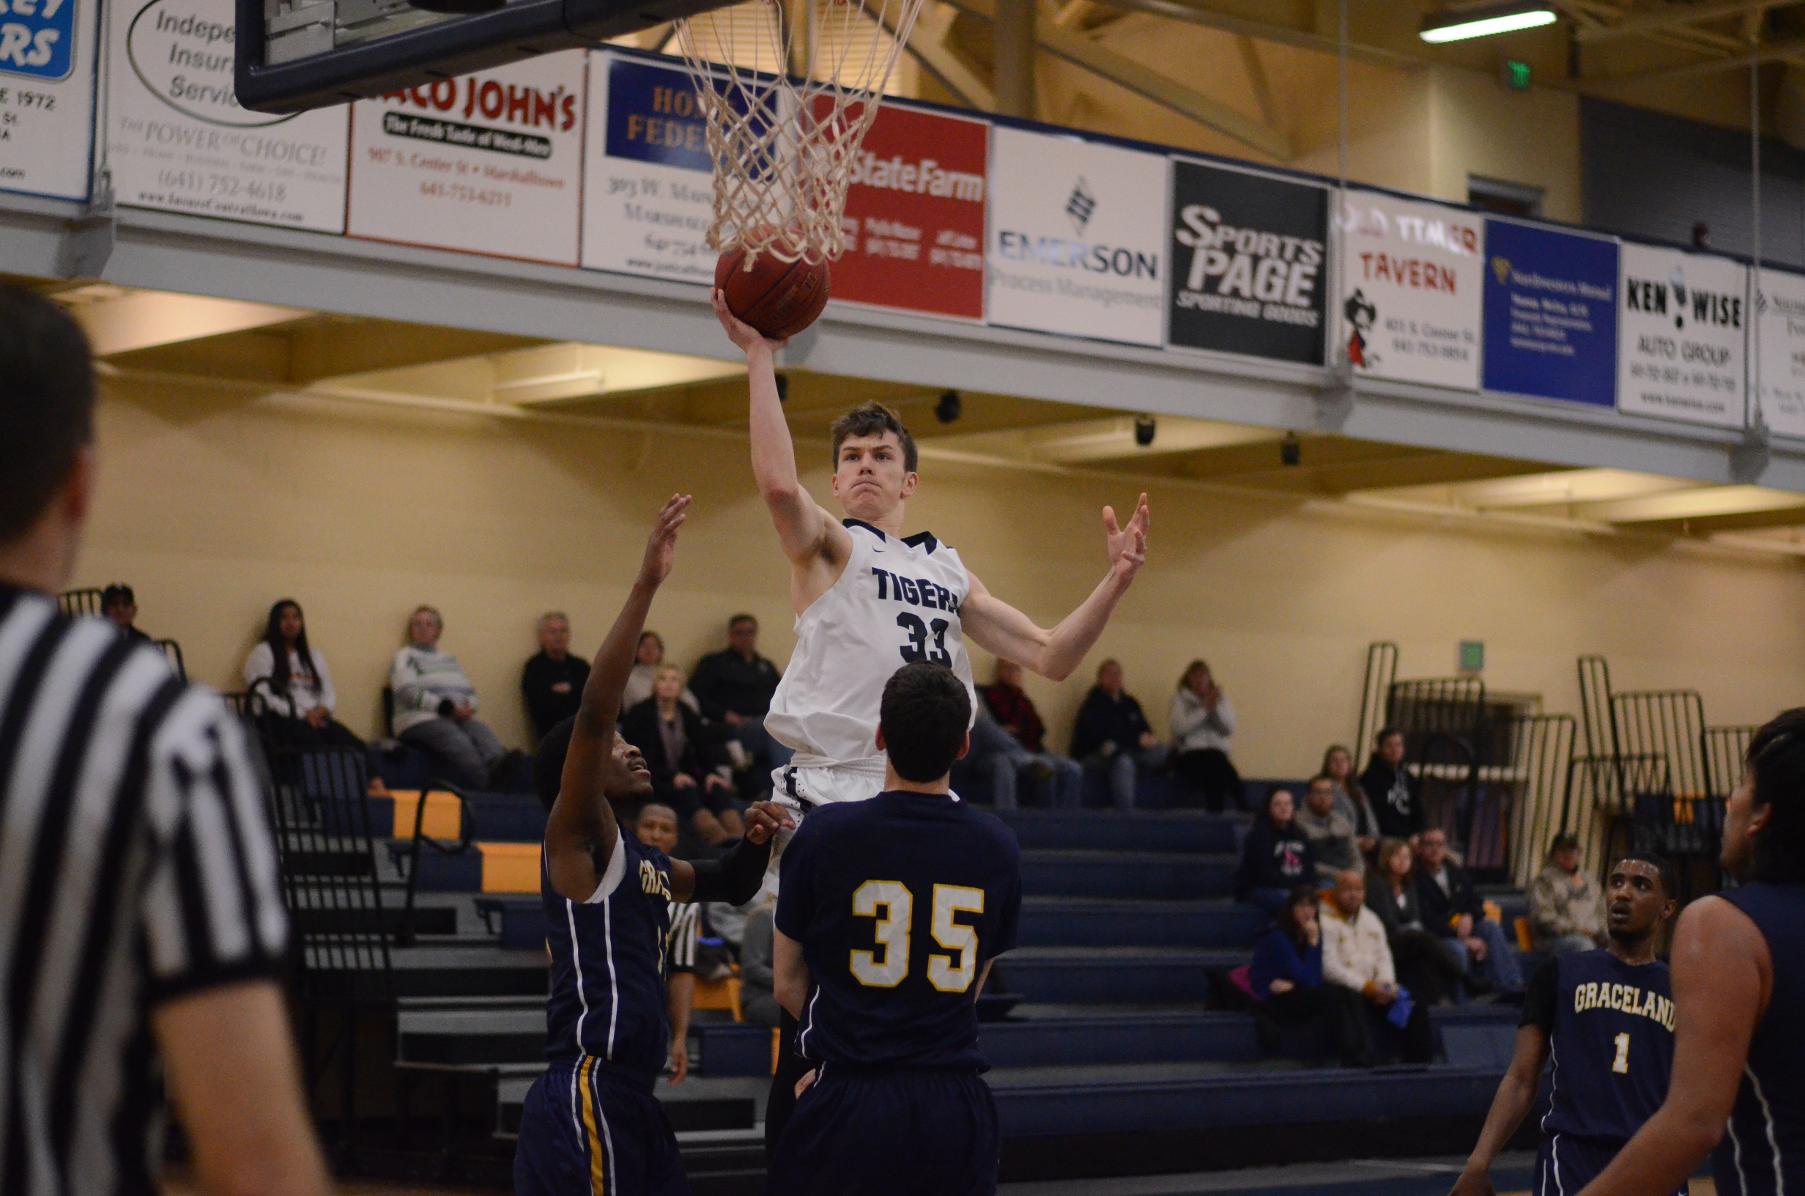 Tigers torch Graceland JV at home